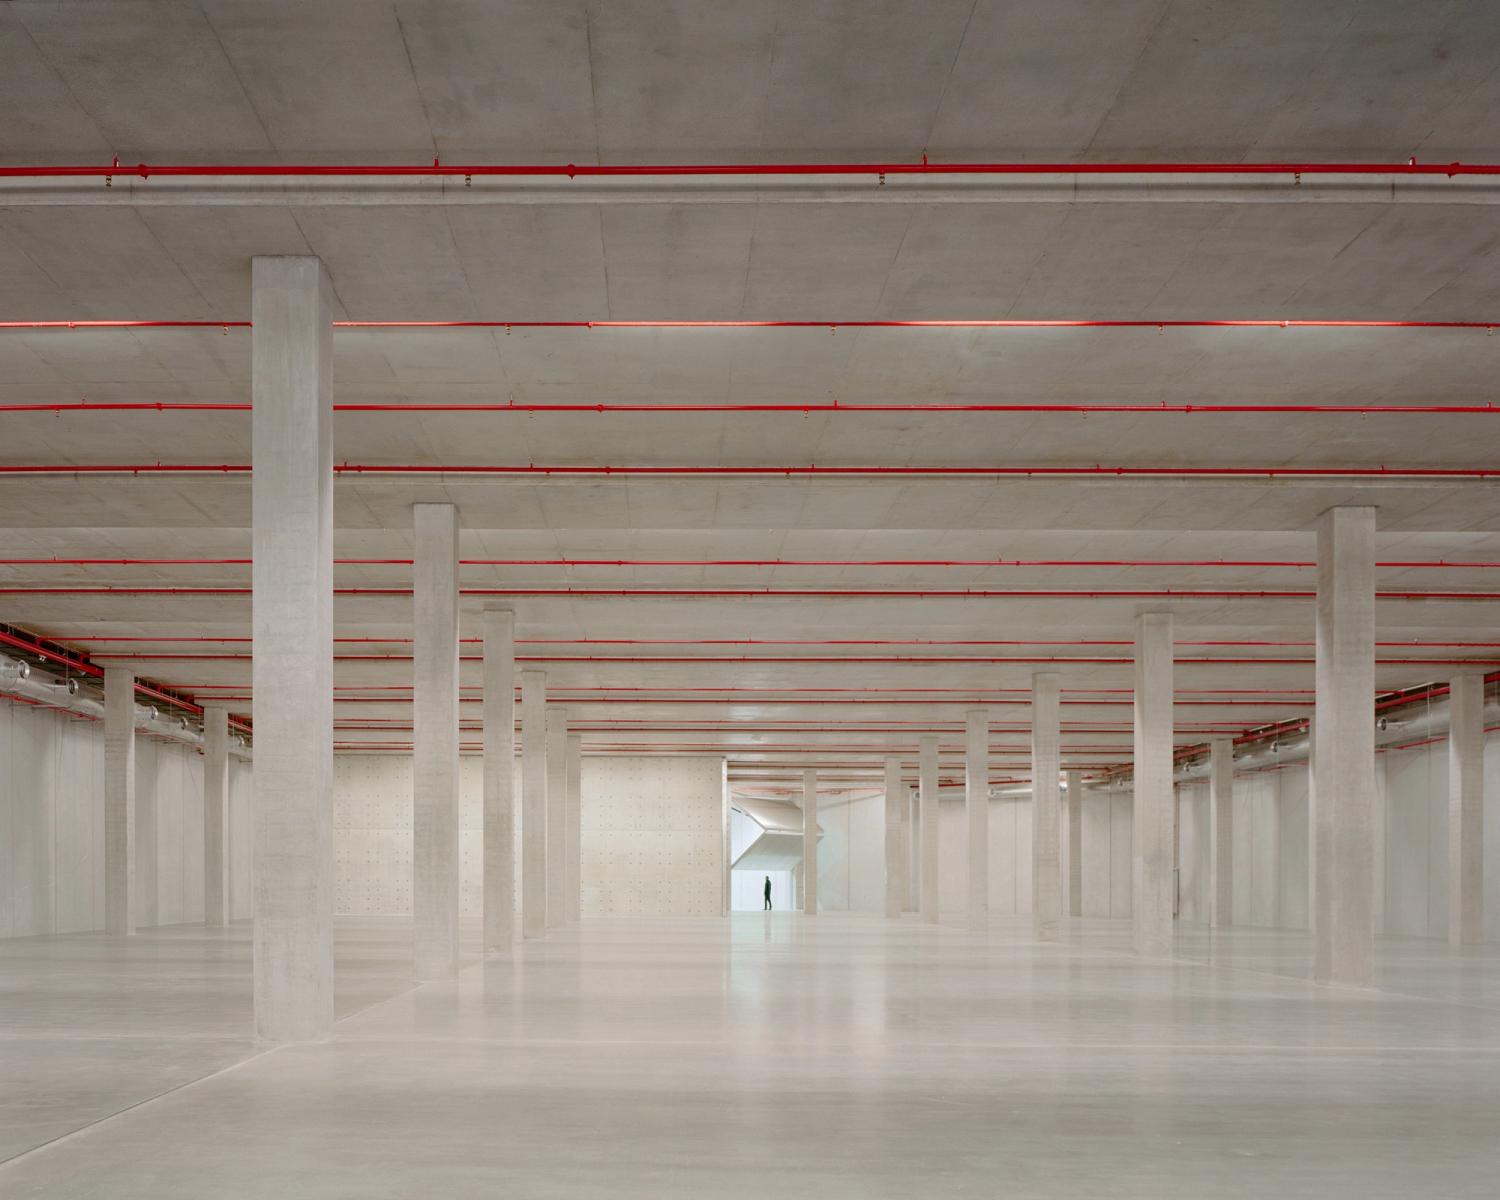 A huge concrete space with many columns. At the far end is a folding door.